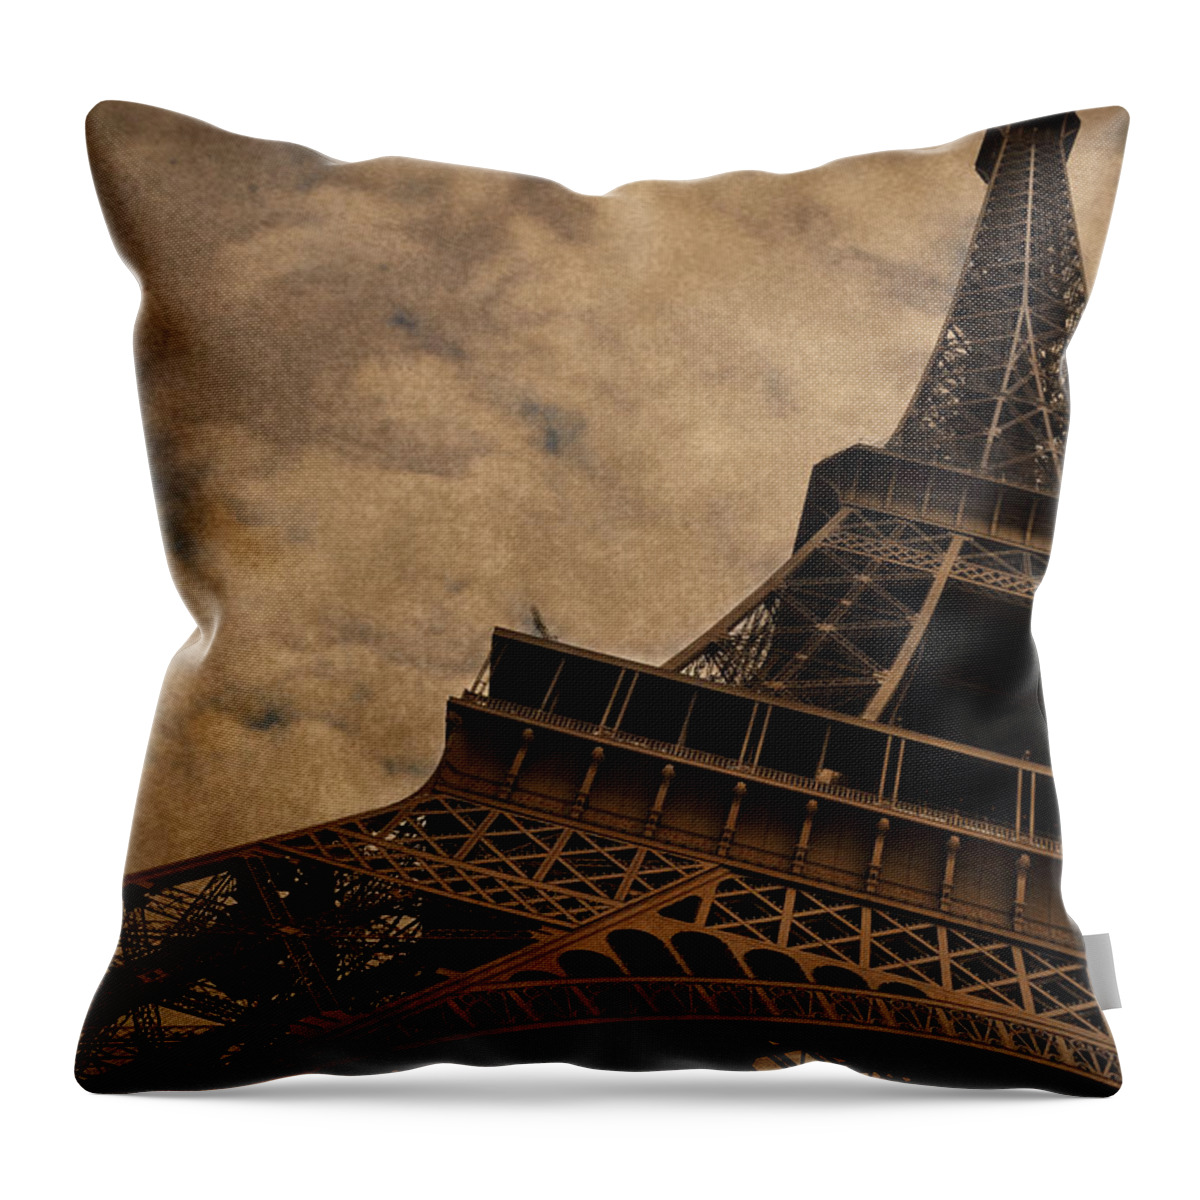 The Eiffel Tower Paris Throw Pillow featuring the photograph Eiffel Tower 2 by Mary Machare